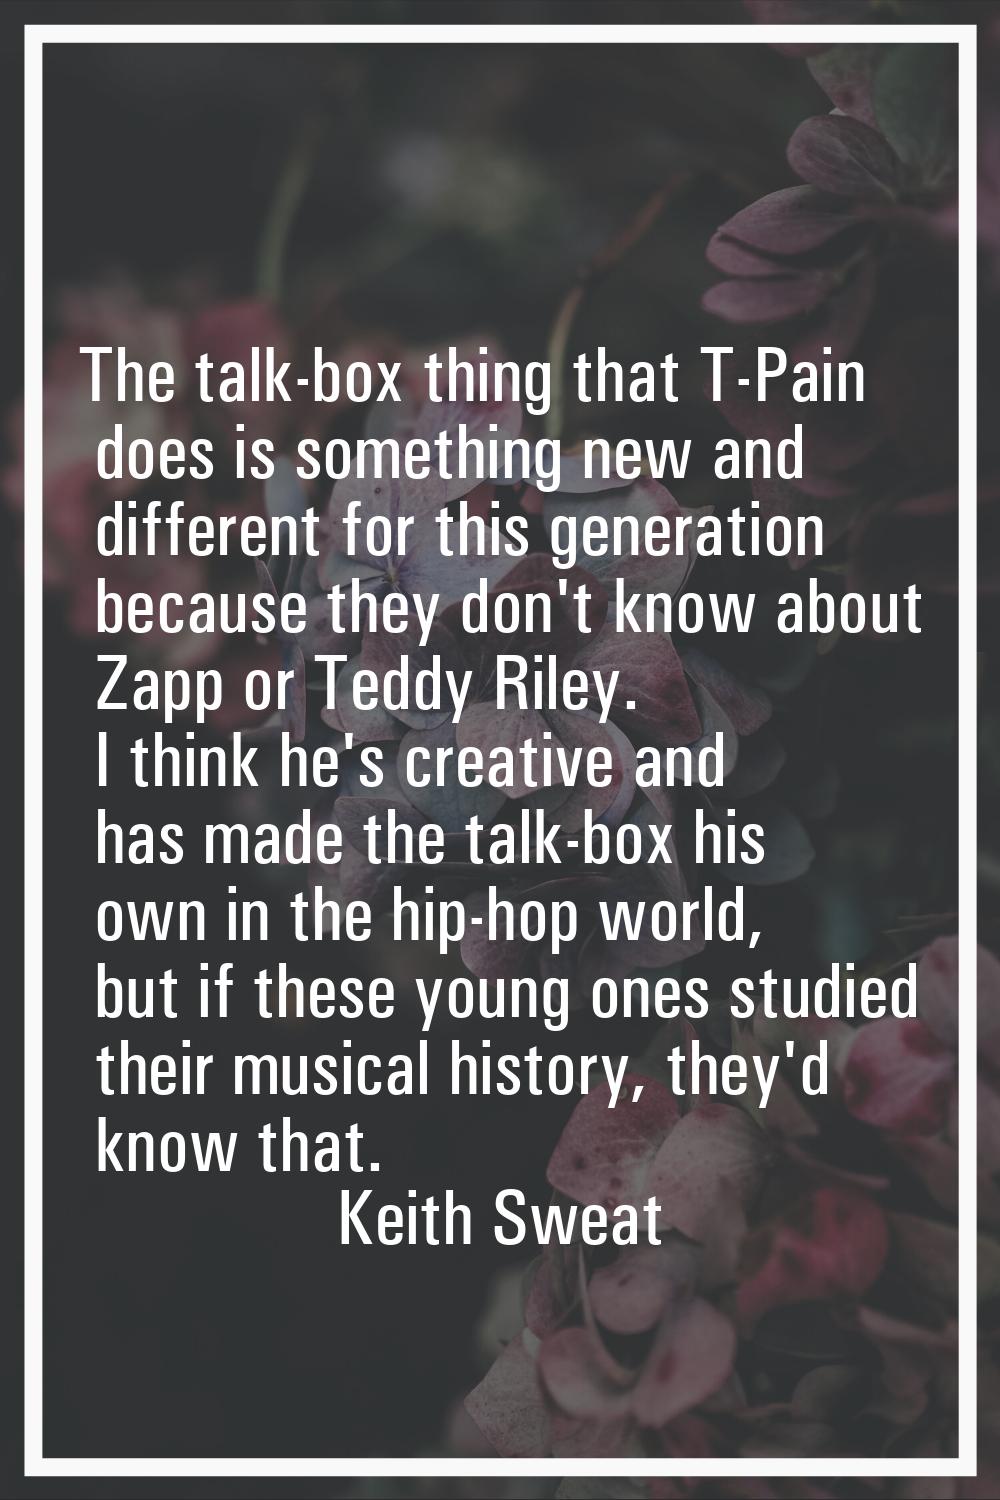 The talk-box thing that T-Pain does is something new and different for this generation because they